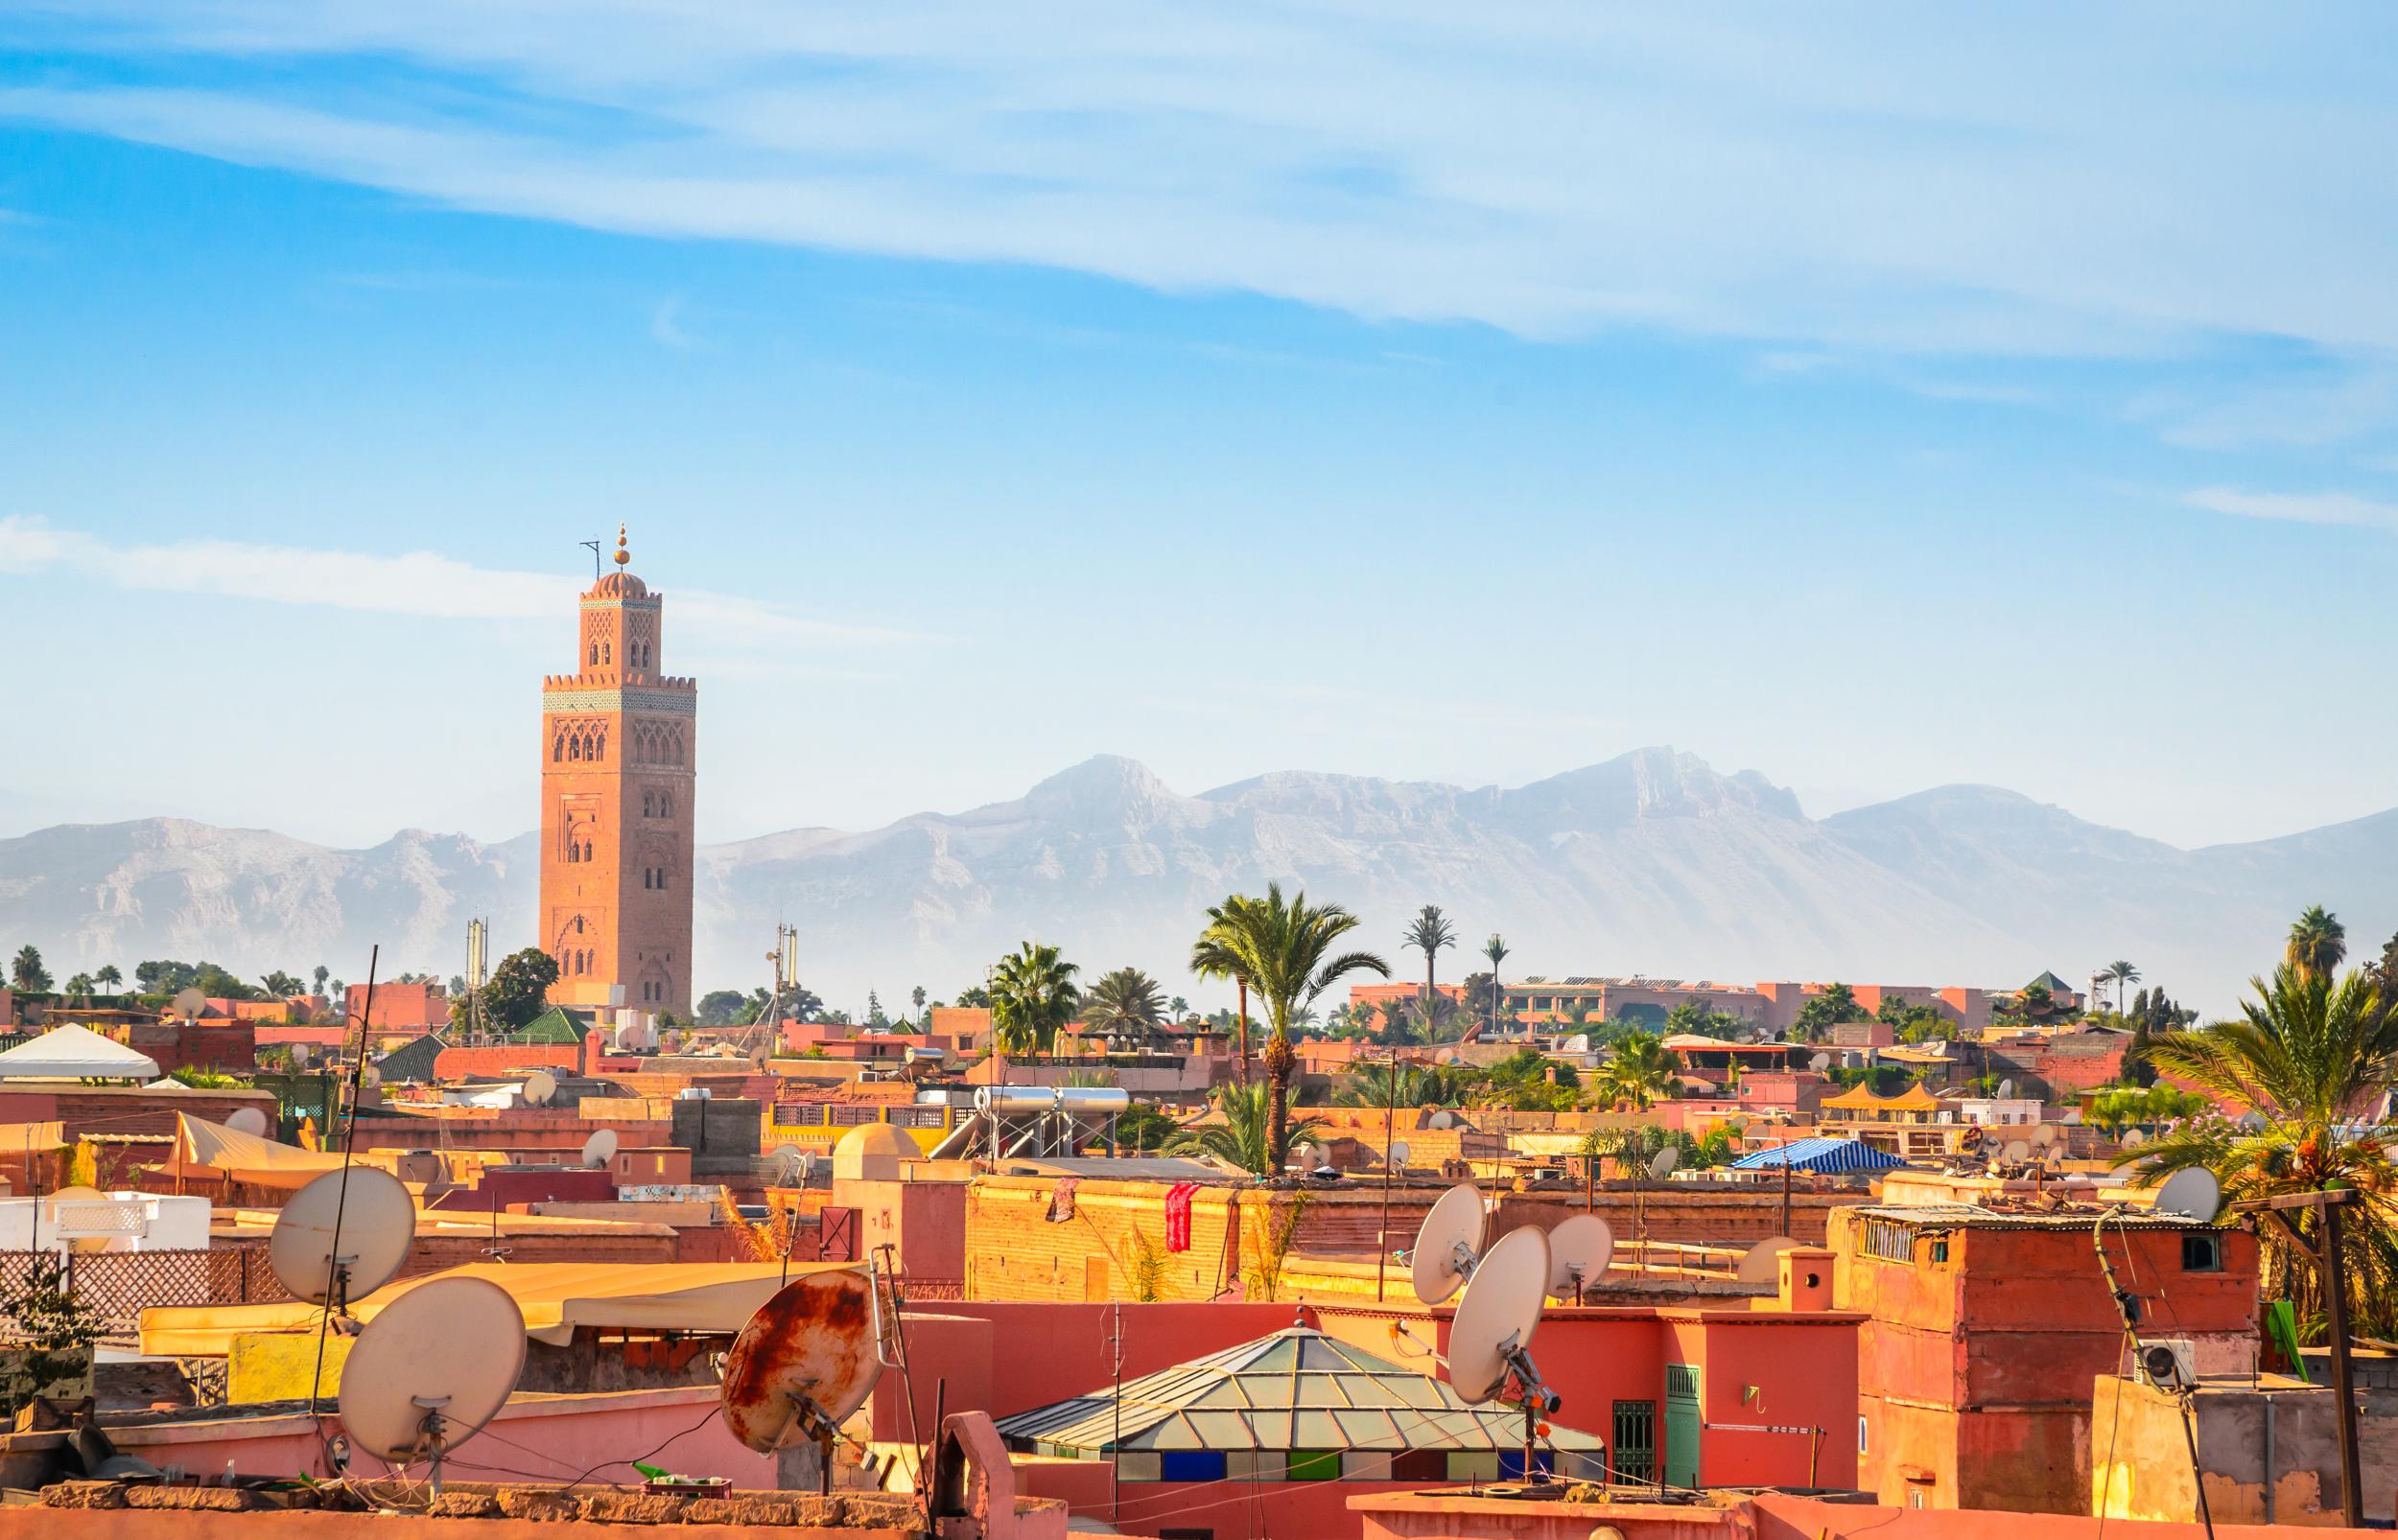 No permit has been given to build any Holocaust memorial in Marrakech-Authorities say